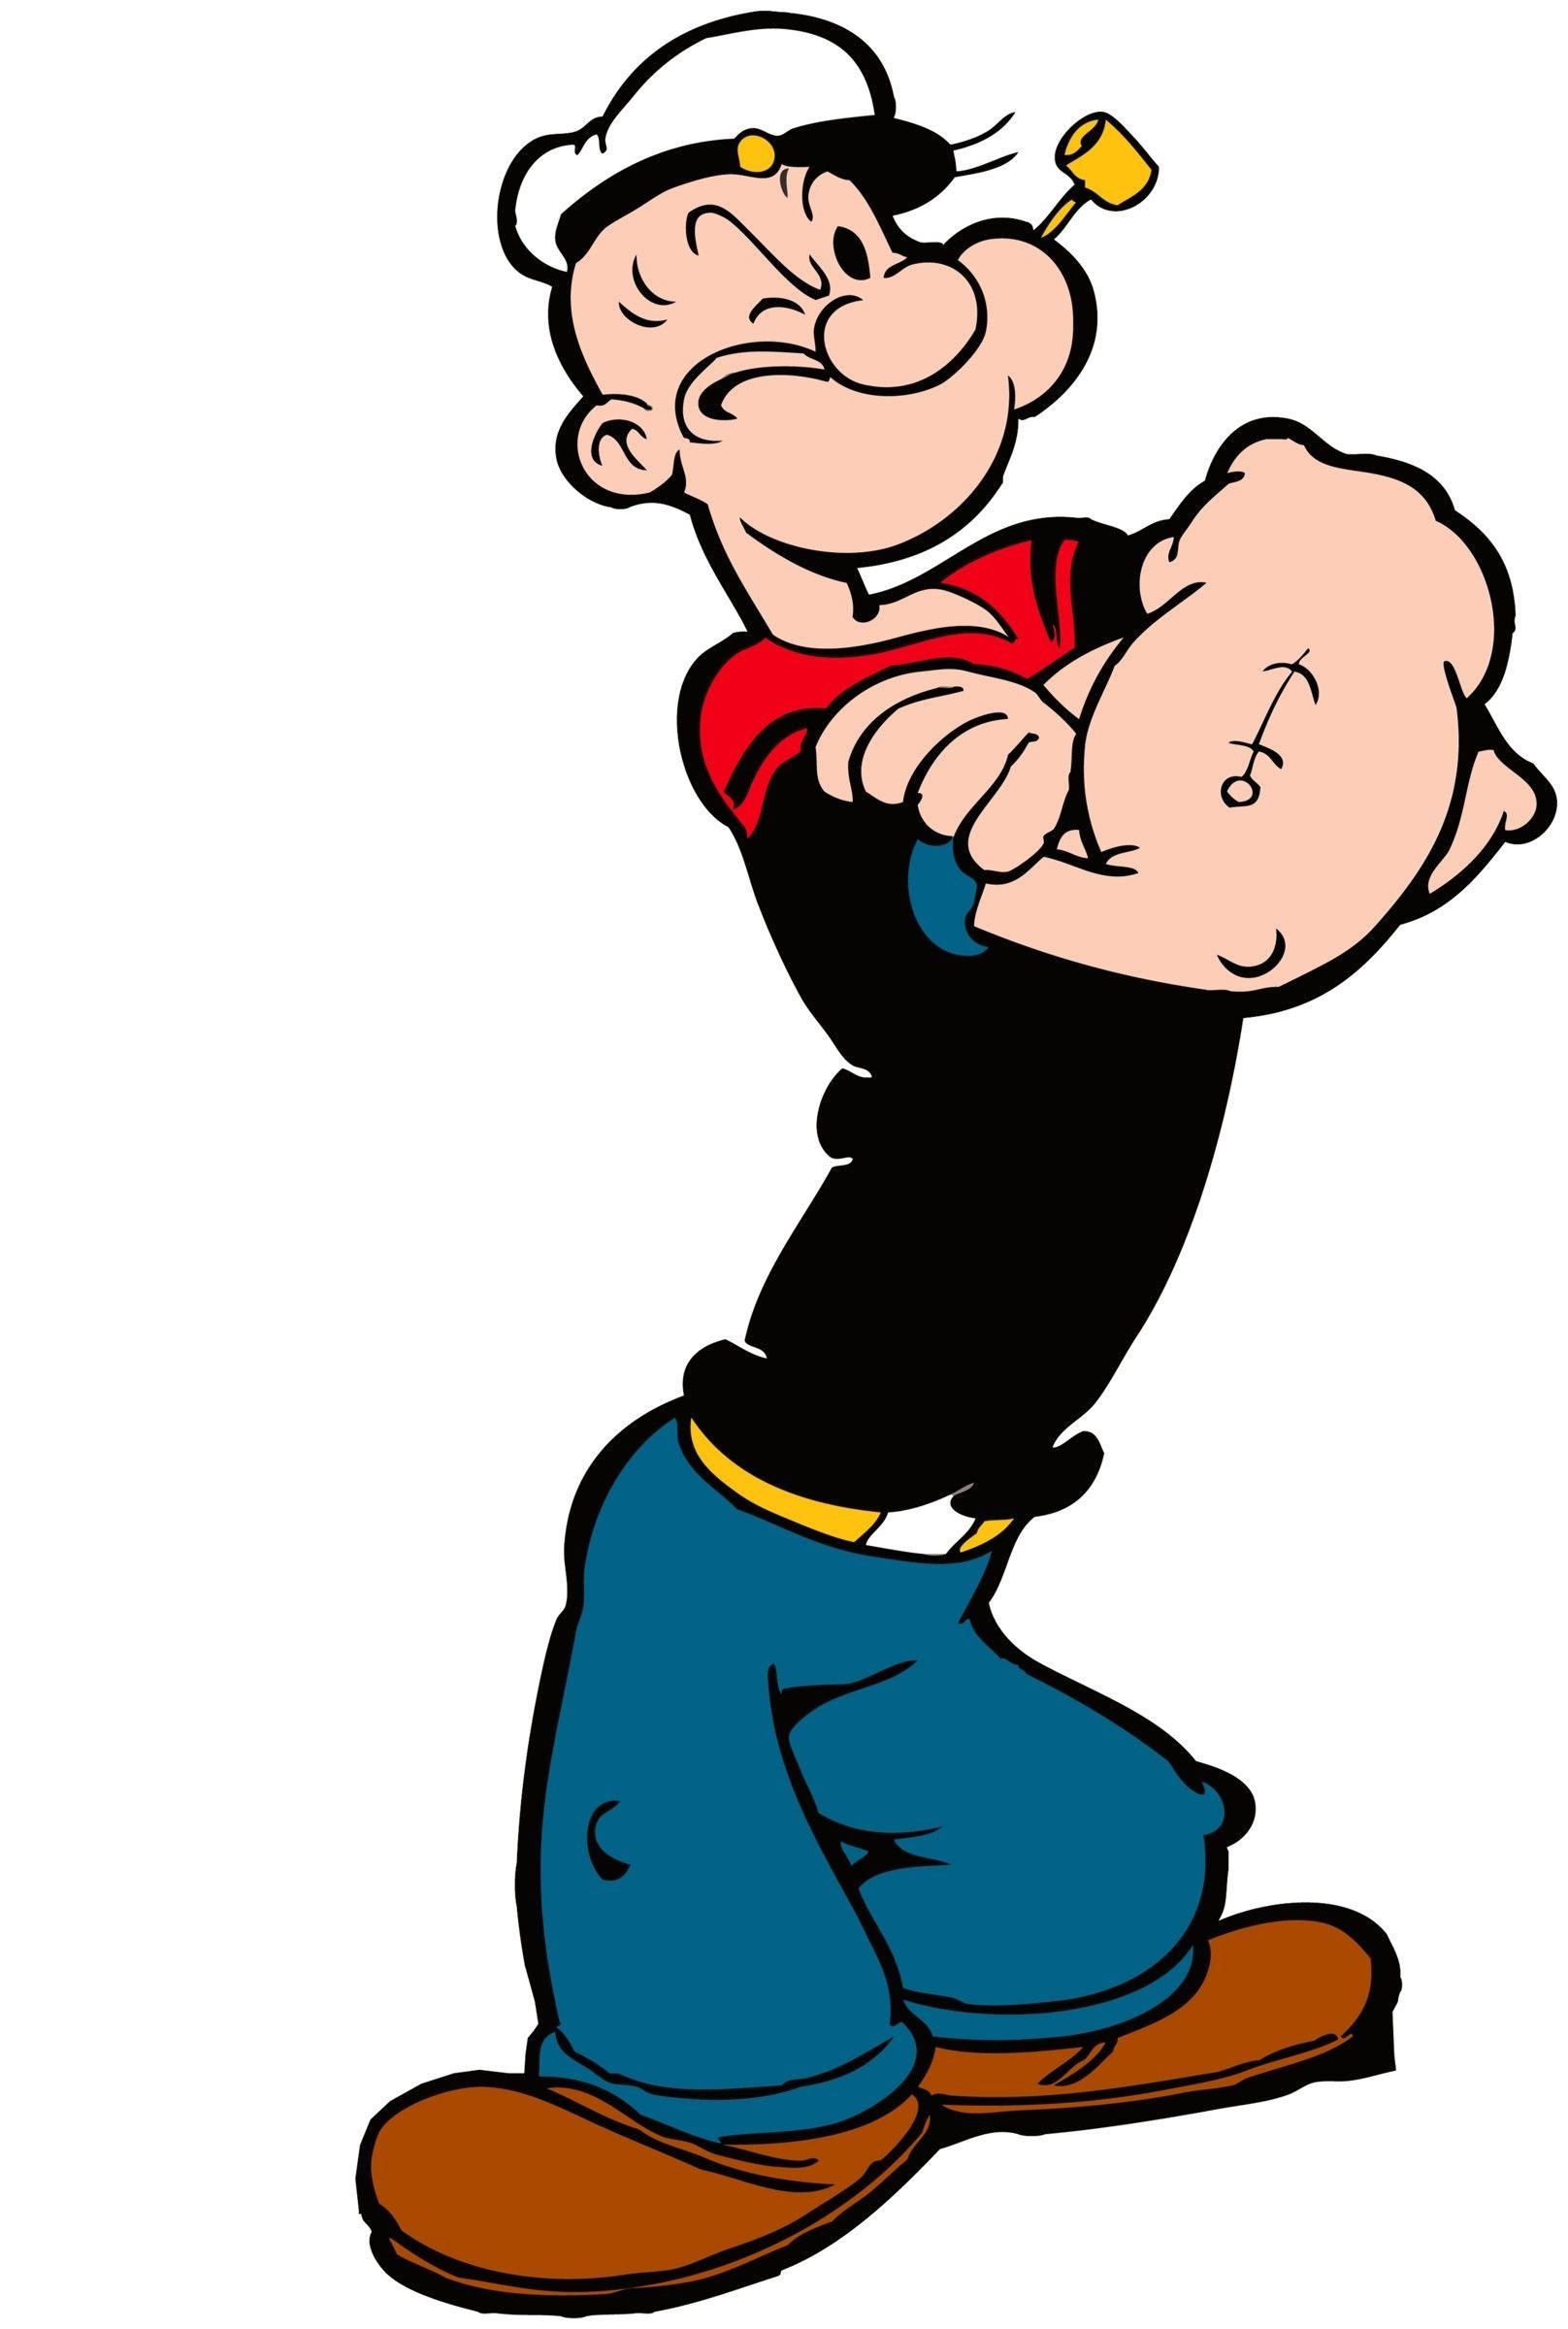 Popeye the Sailor Animation, Popeye the Sailor Man, Wallpapers, Backgrounds, 1620x2400 HD Handy